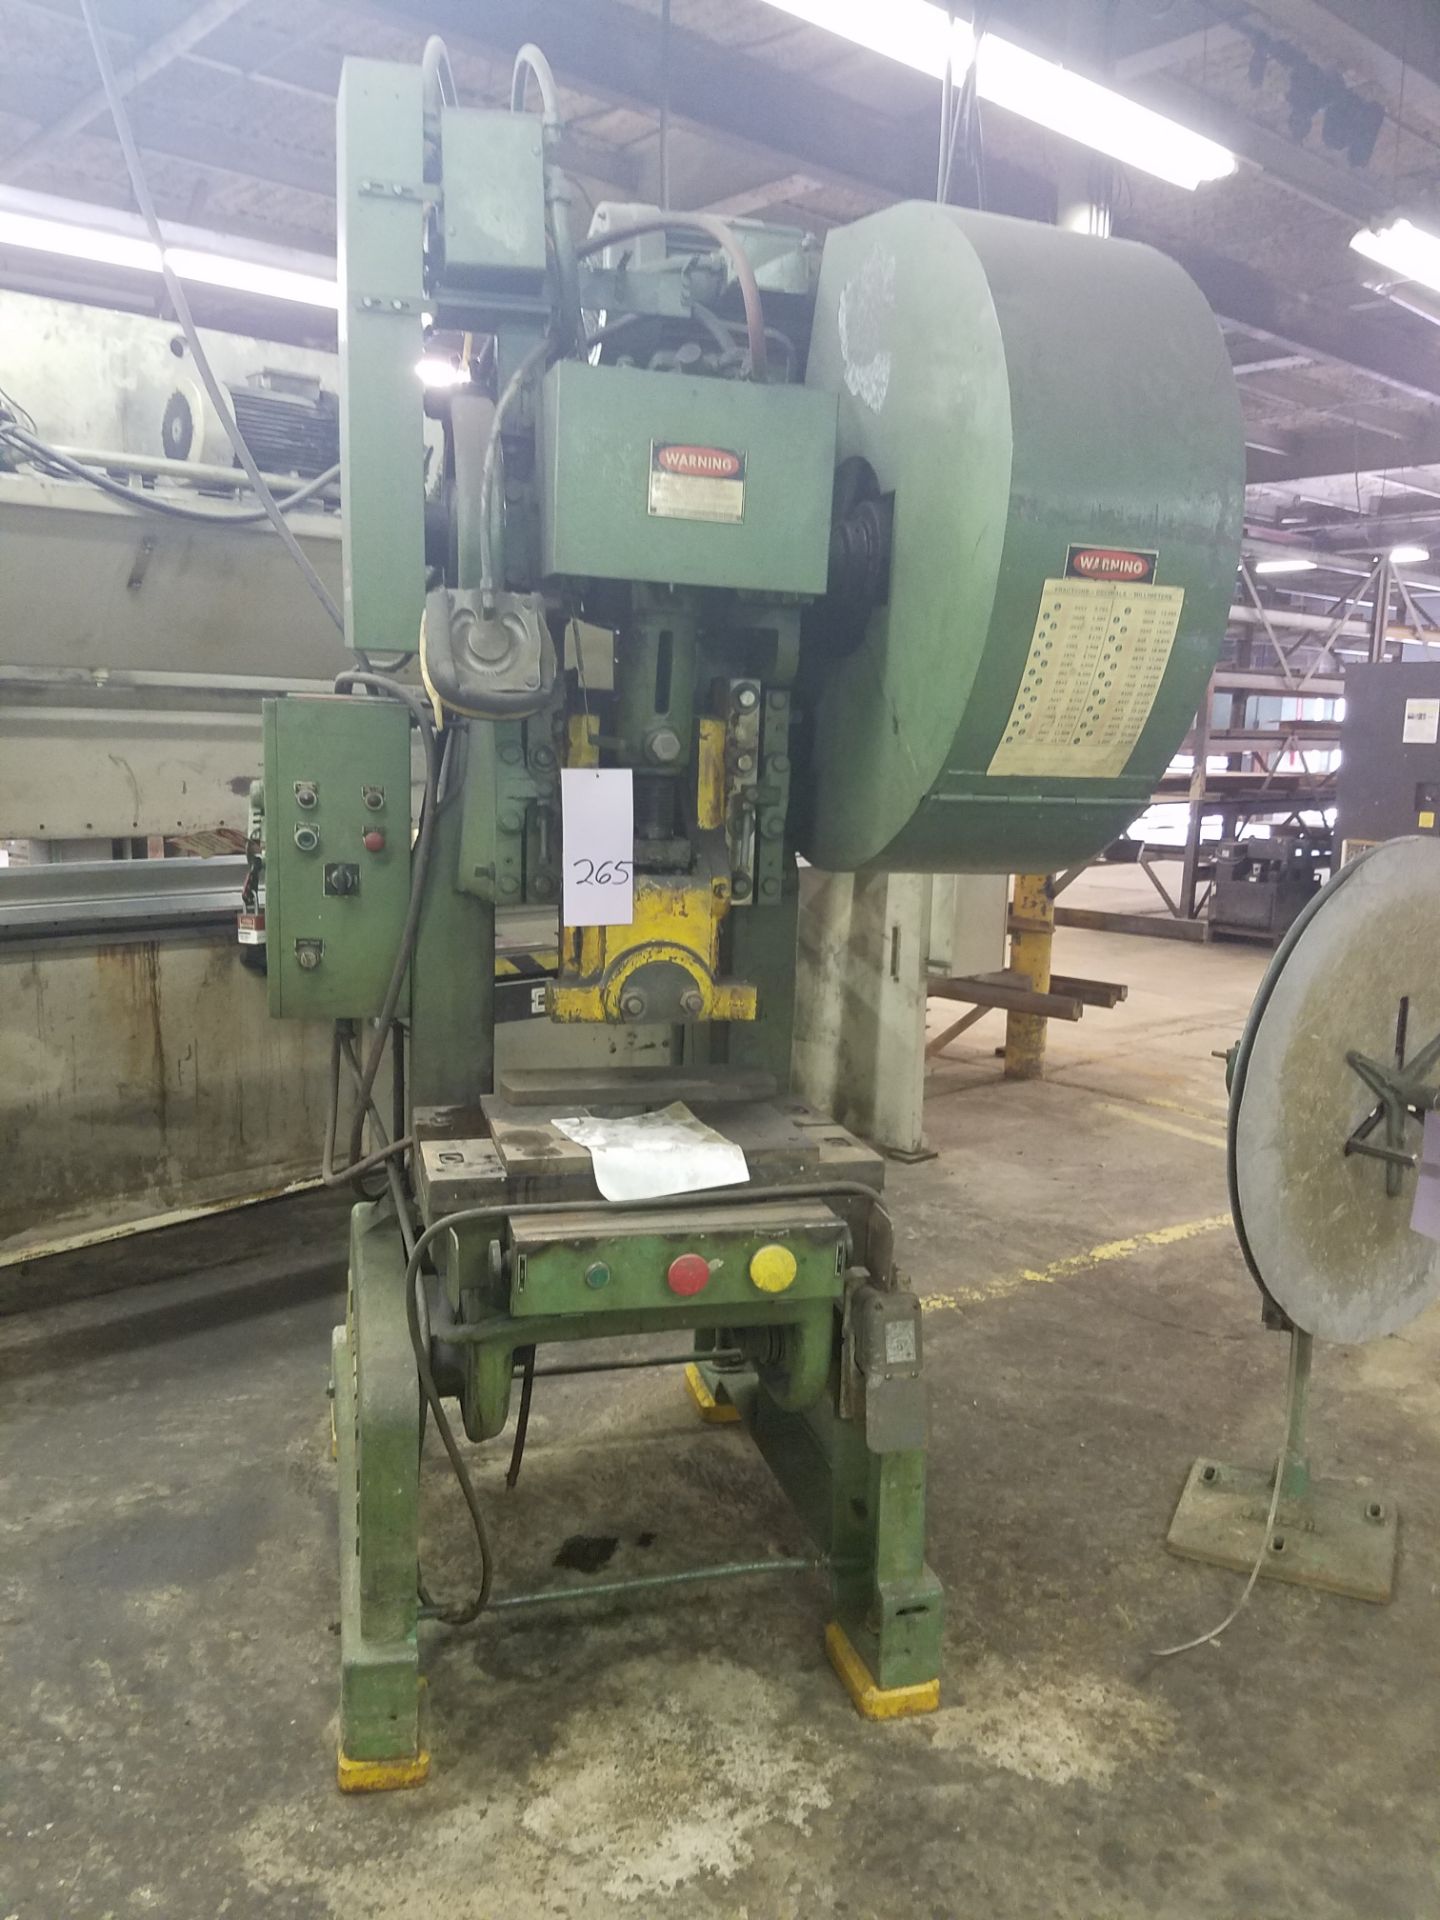 ROUSELLE PUNCH PRESS #4 40 TON, 3" STROKE, 12" SHUT HEIGHT, PALM BUTTON CONTROL, 16"X26" BED, AIR